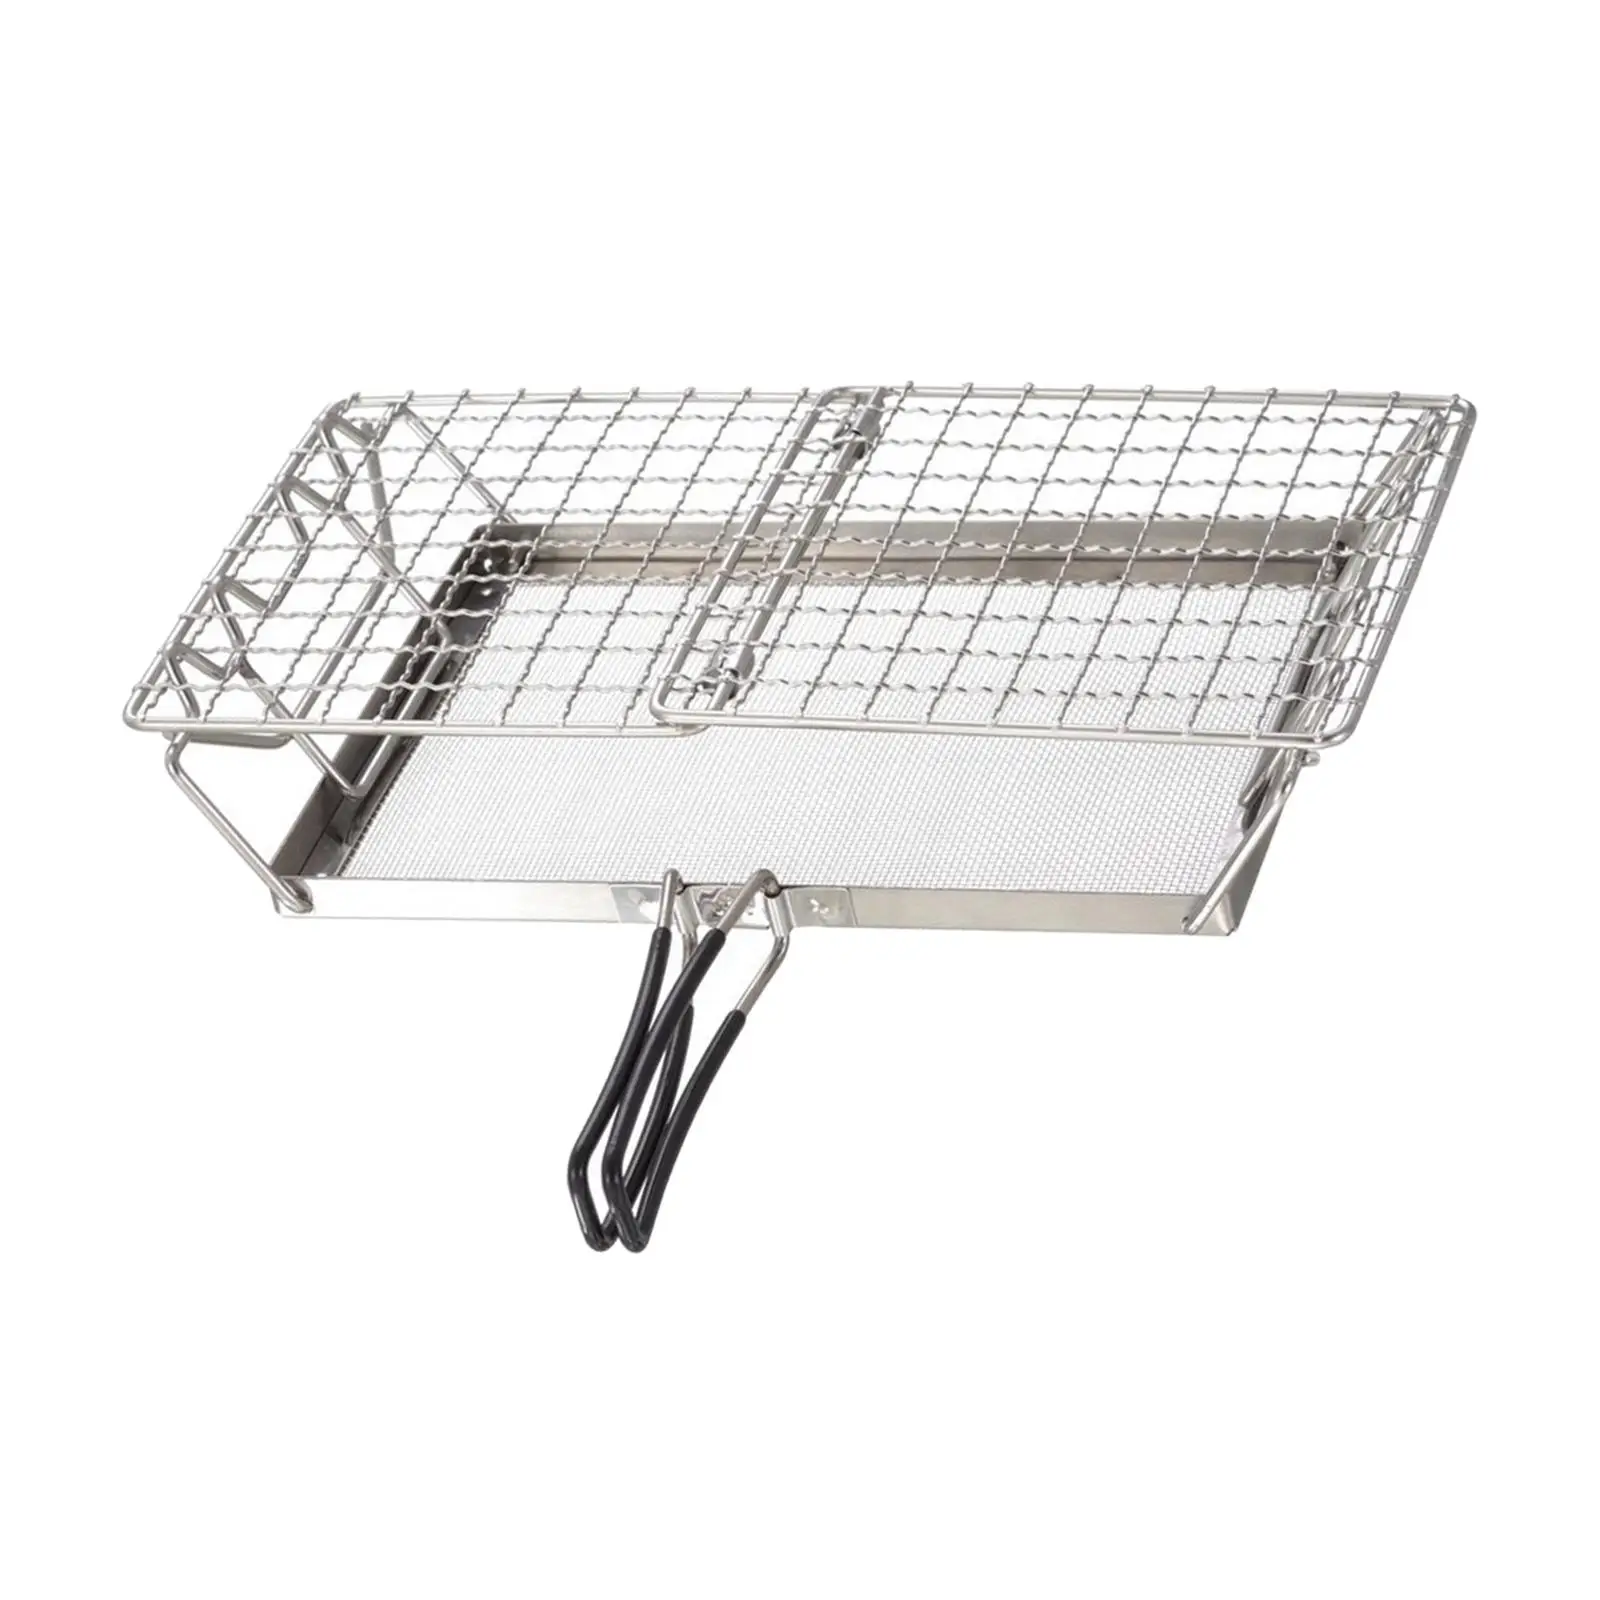 Grill Basket Net Holder Foldable Mesh Stainless Steel Barbecue for Toast